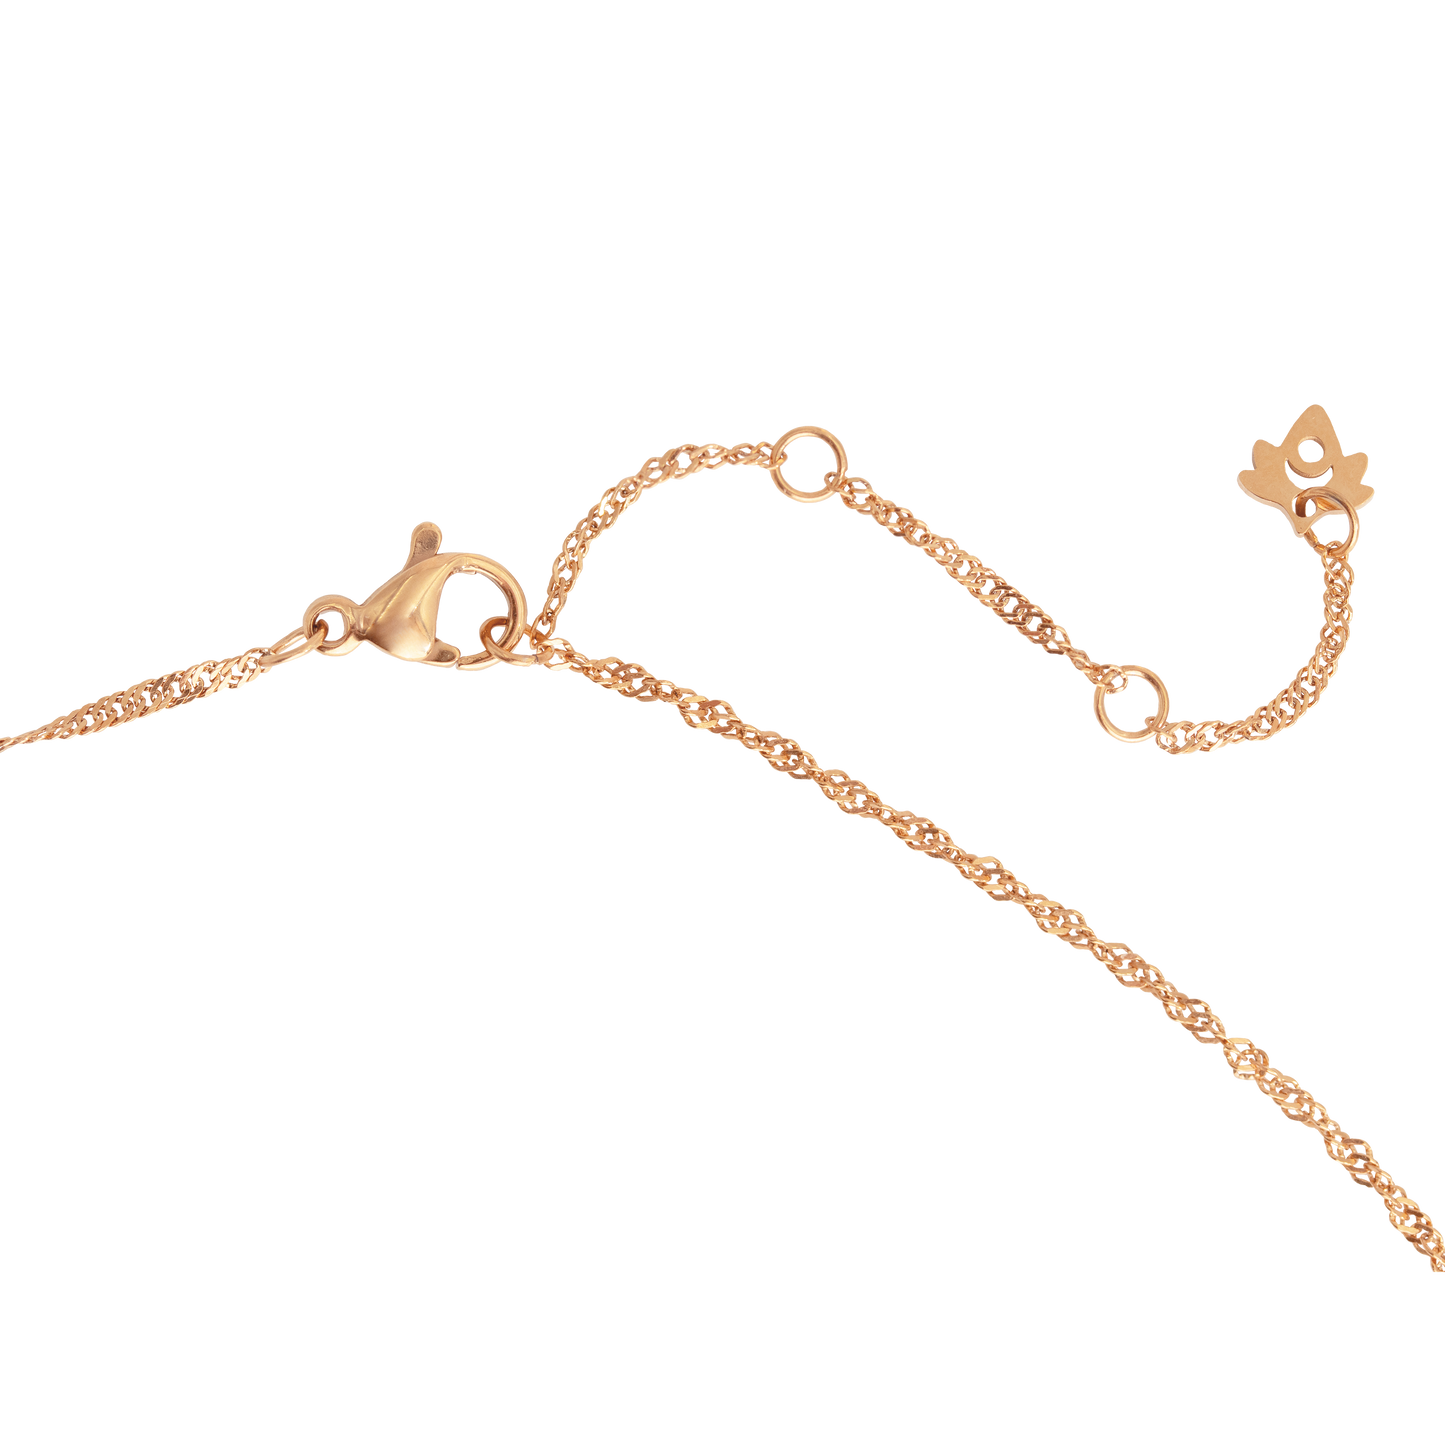 Flowery Necklace Rose Gold